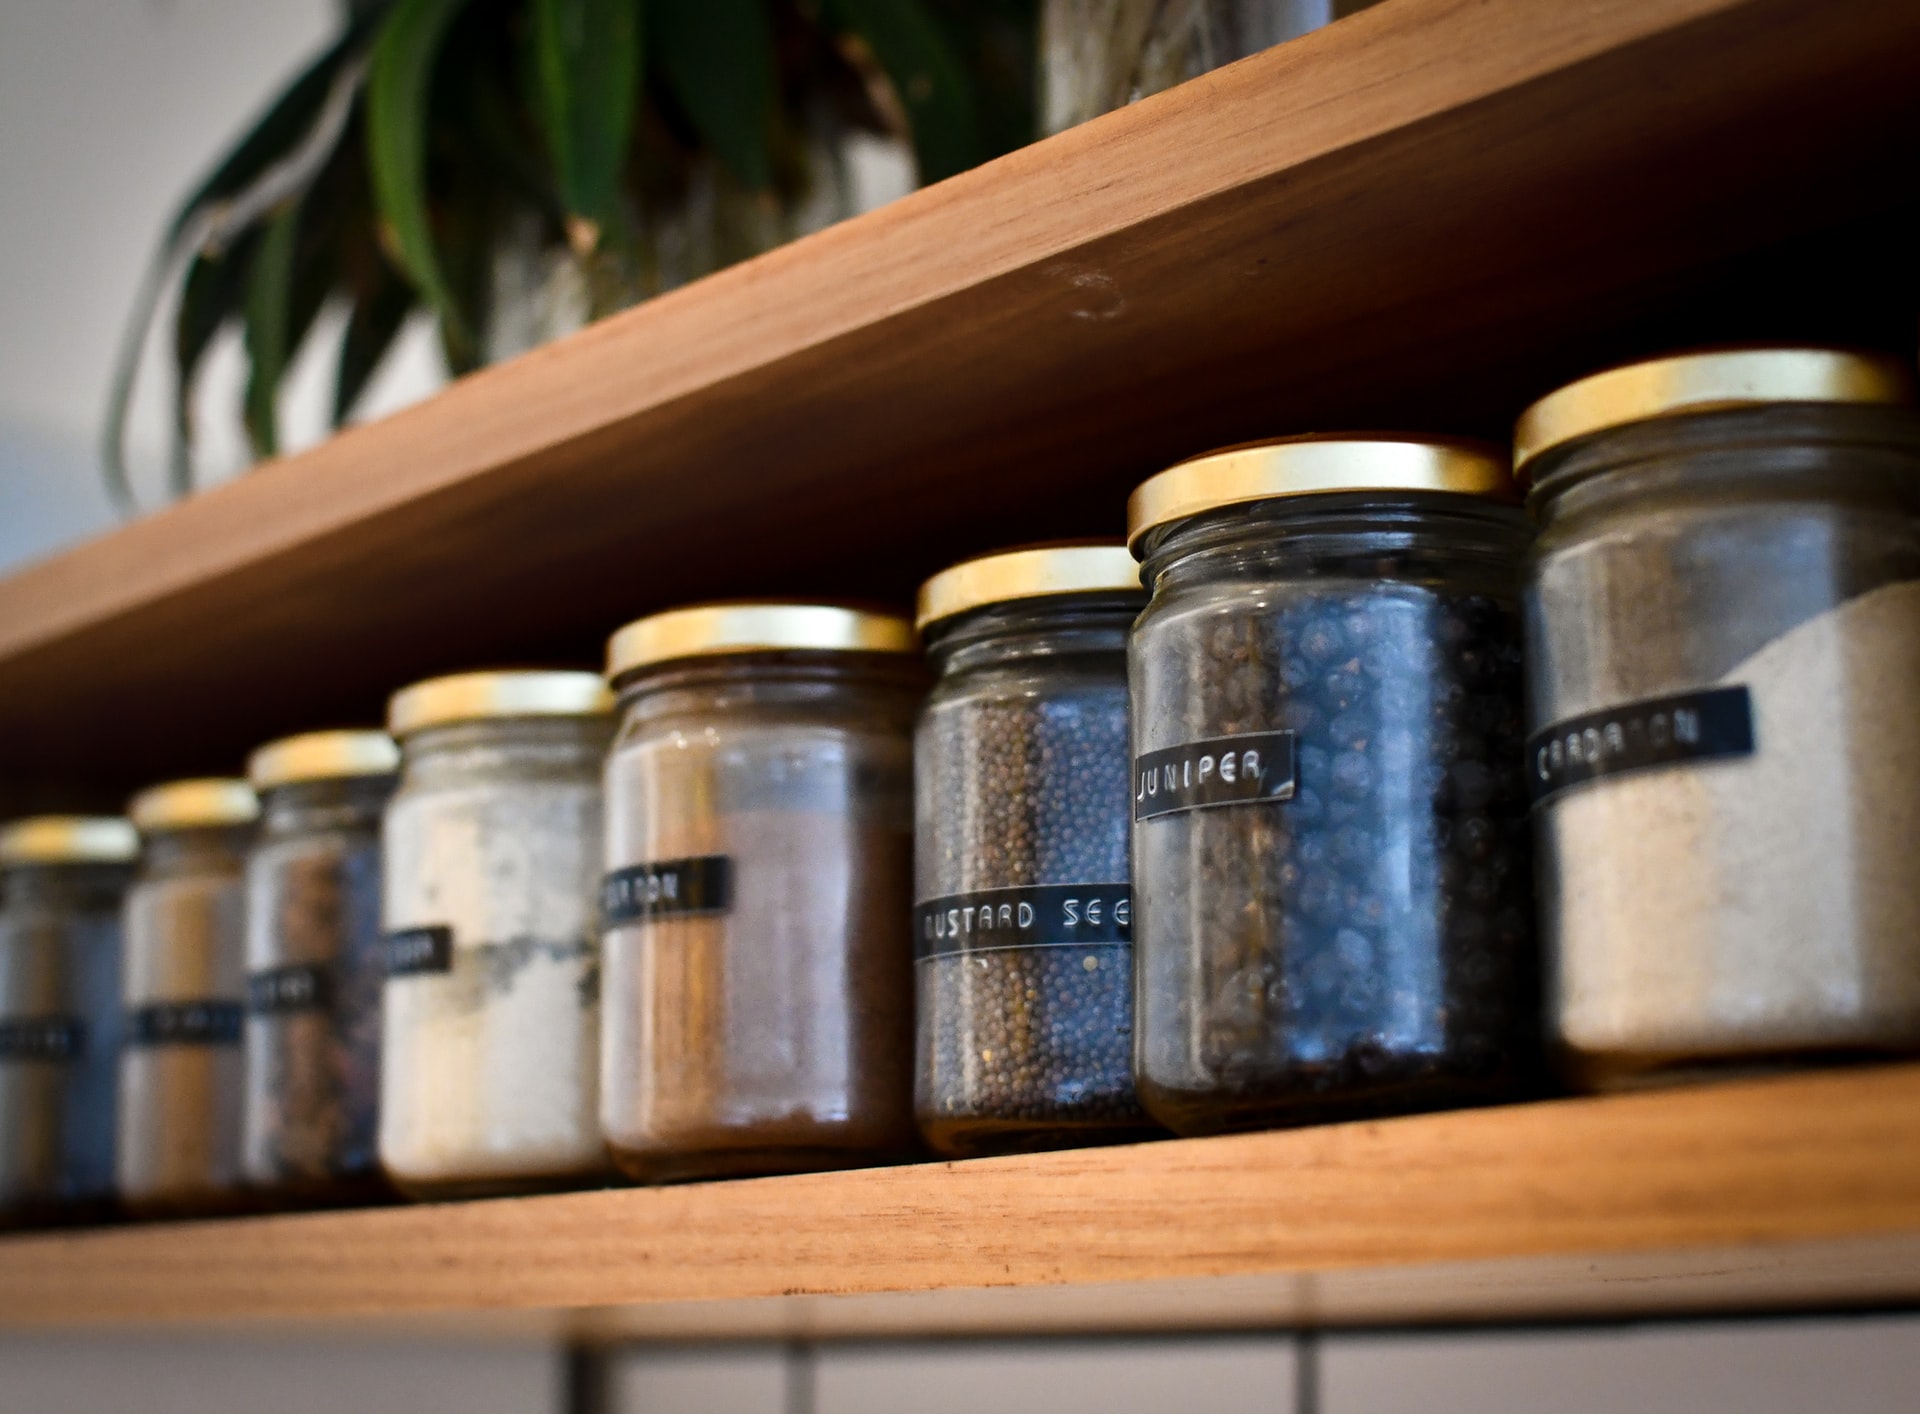 Spice rack with jars, shallow depth of field